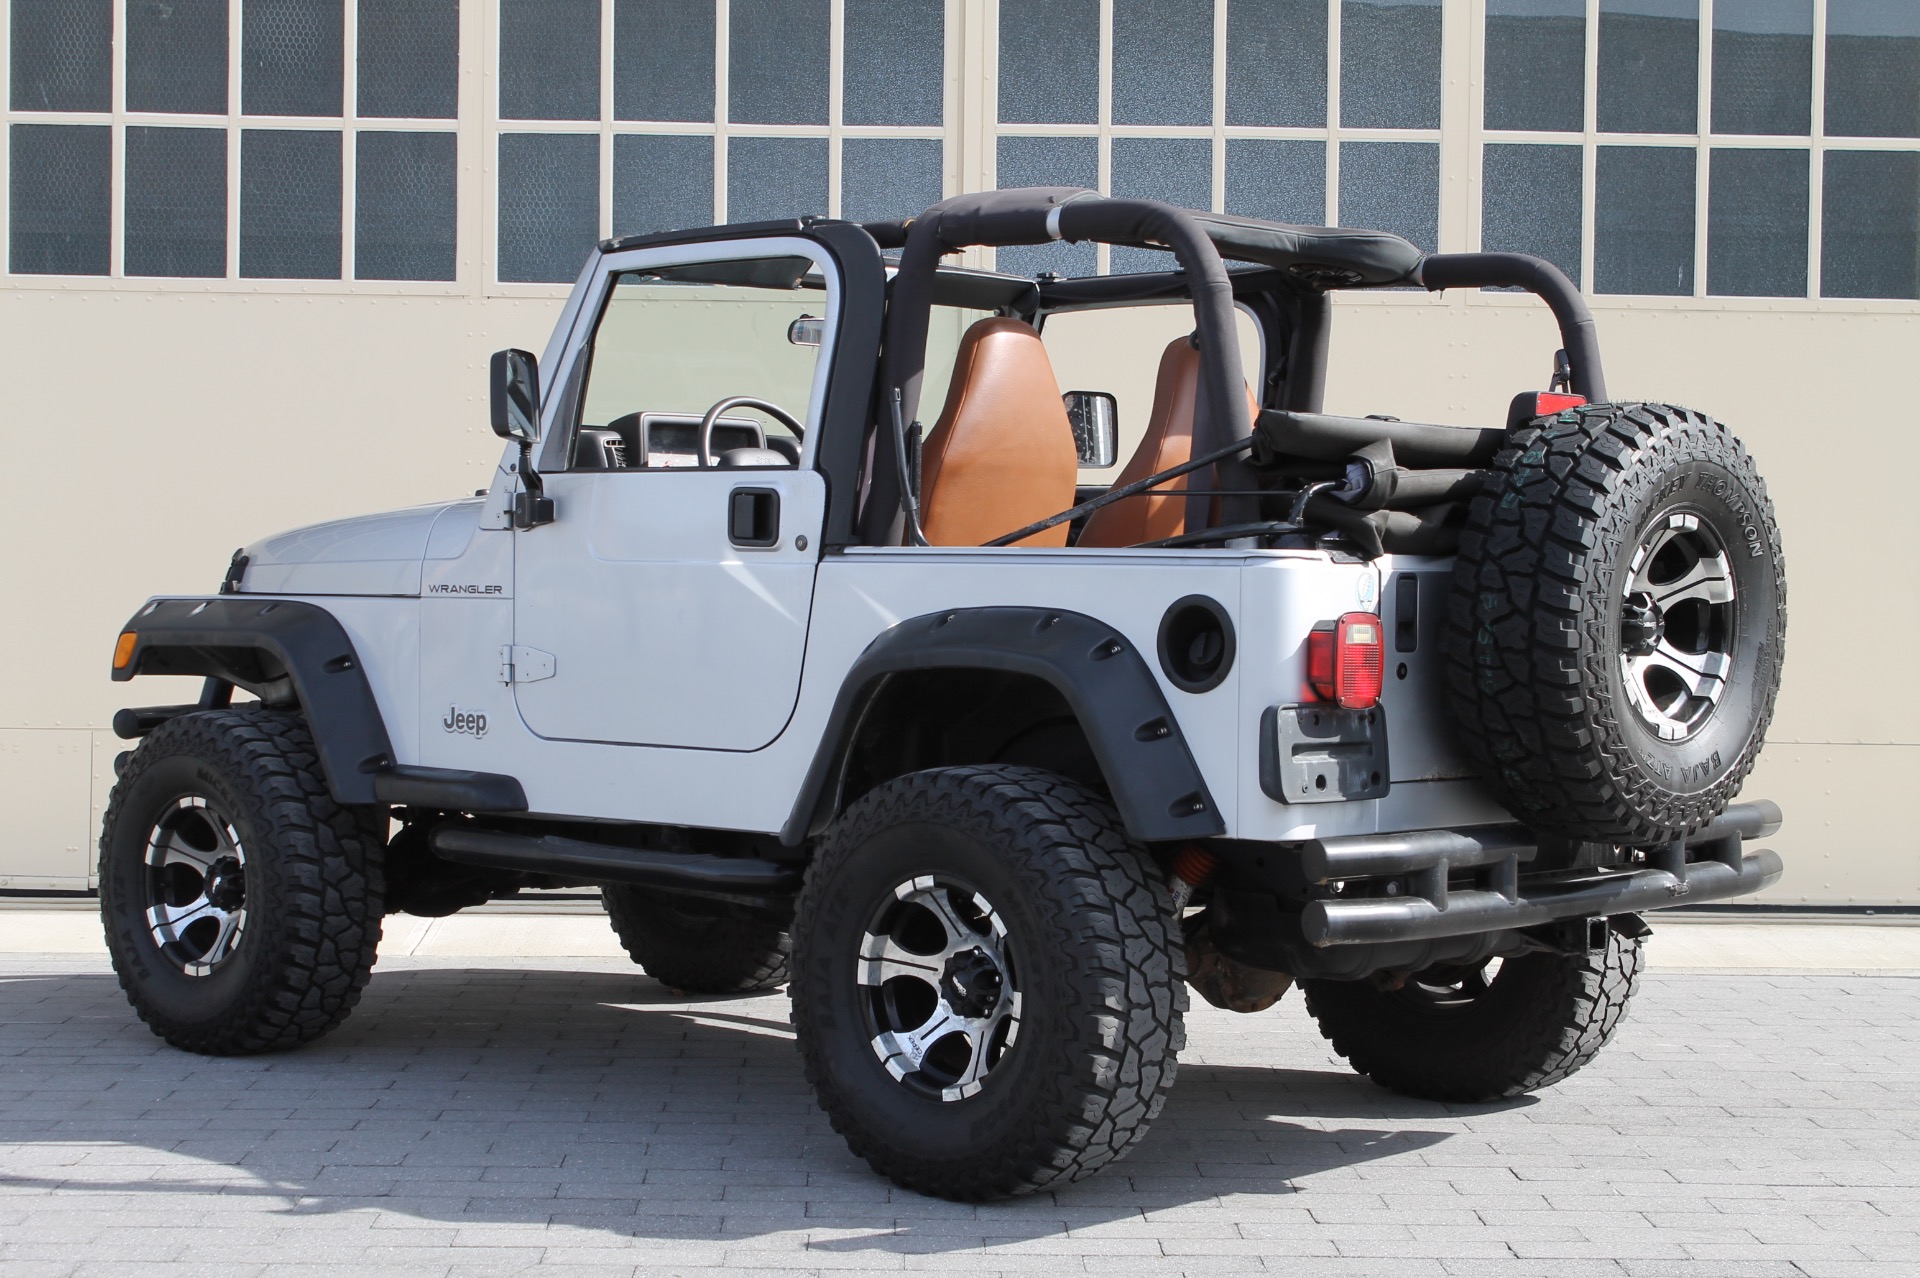 Used 2002 Jeep Wrangler Apex Apex edition For Sale ($10,900) | Legend  Leasing Stock #3581